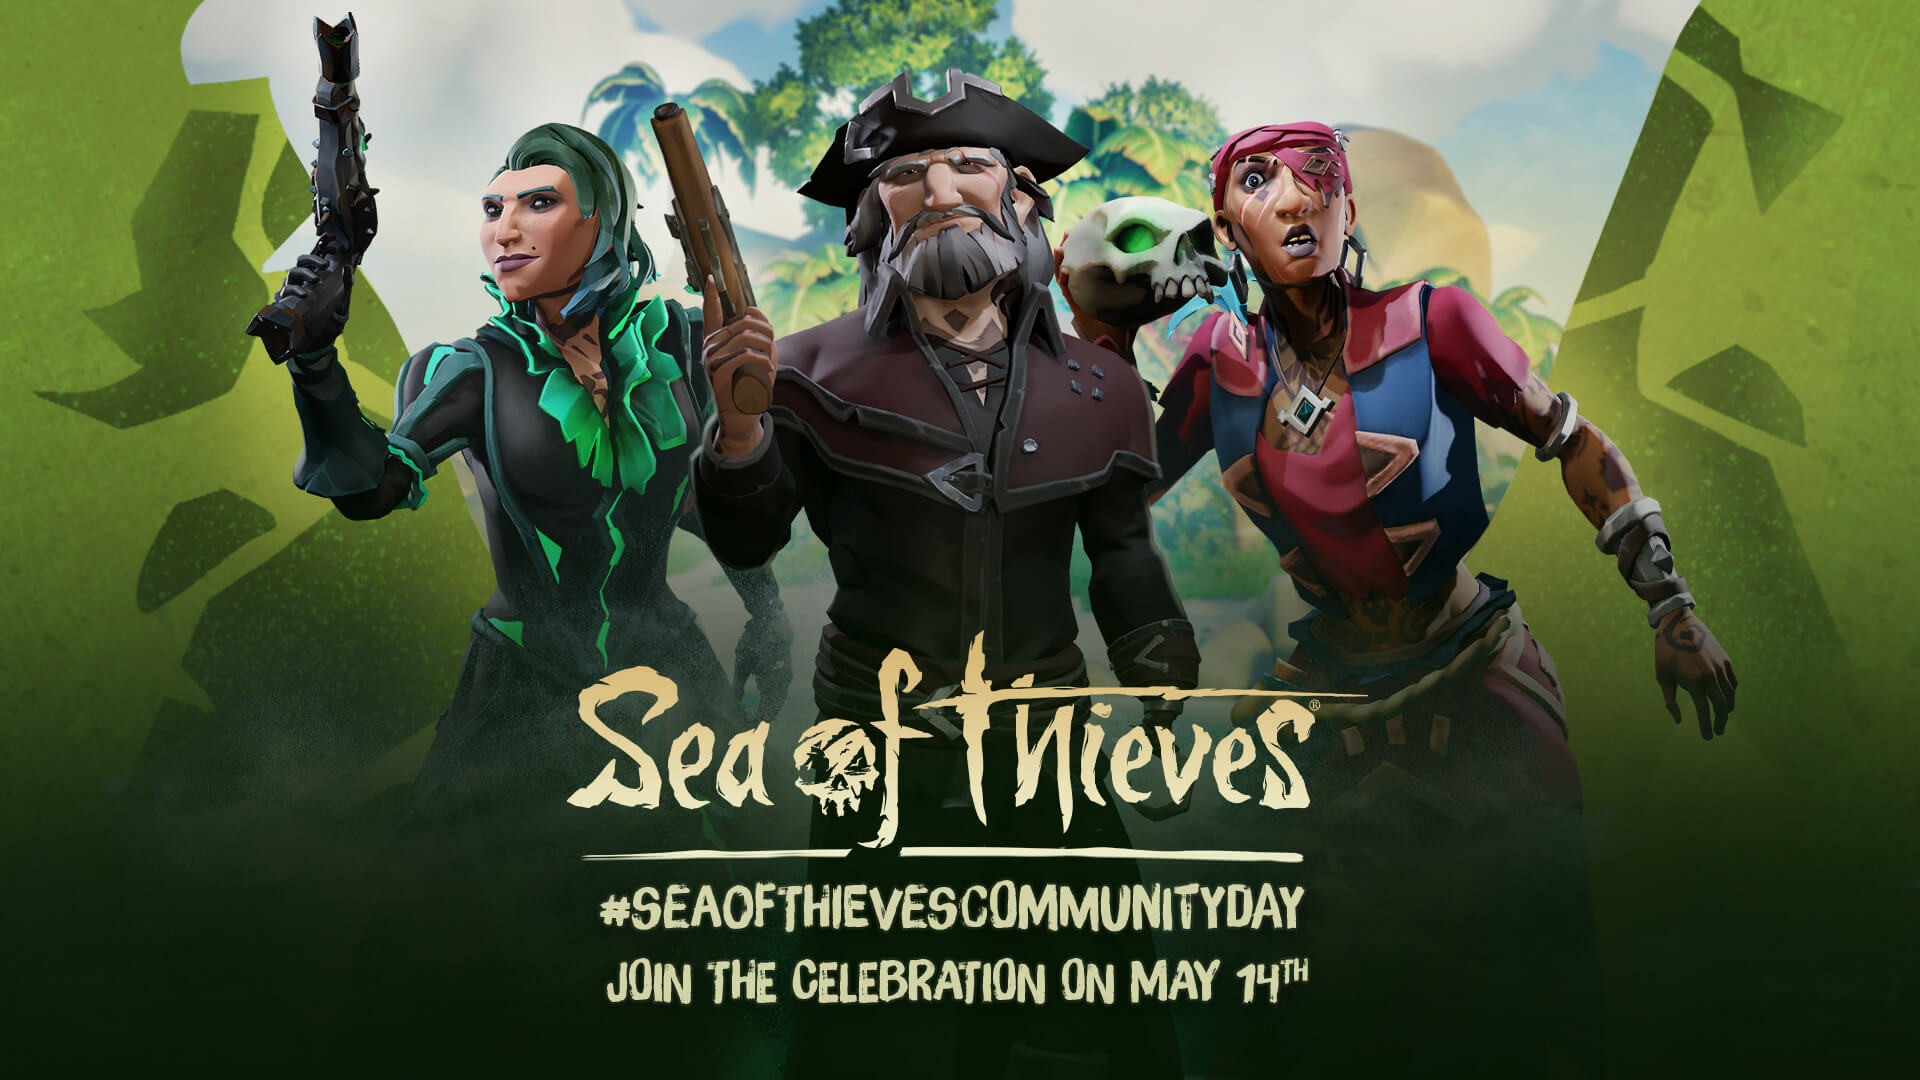 I can't play/download Sea of Thieves : r/Seaofthieves